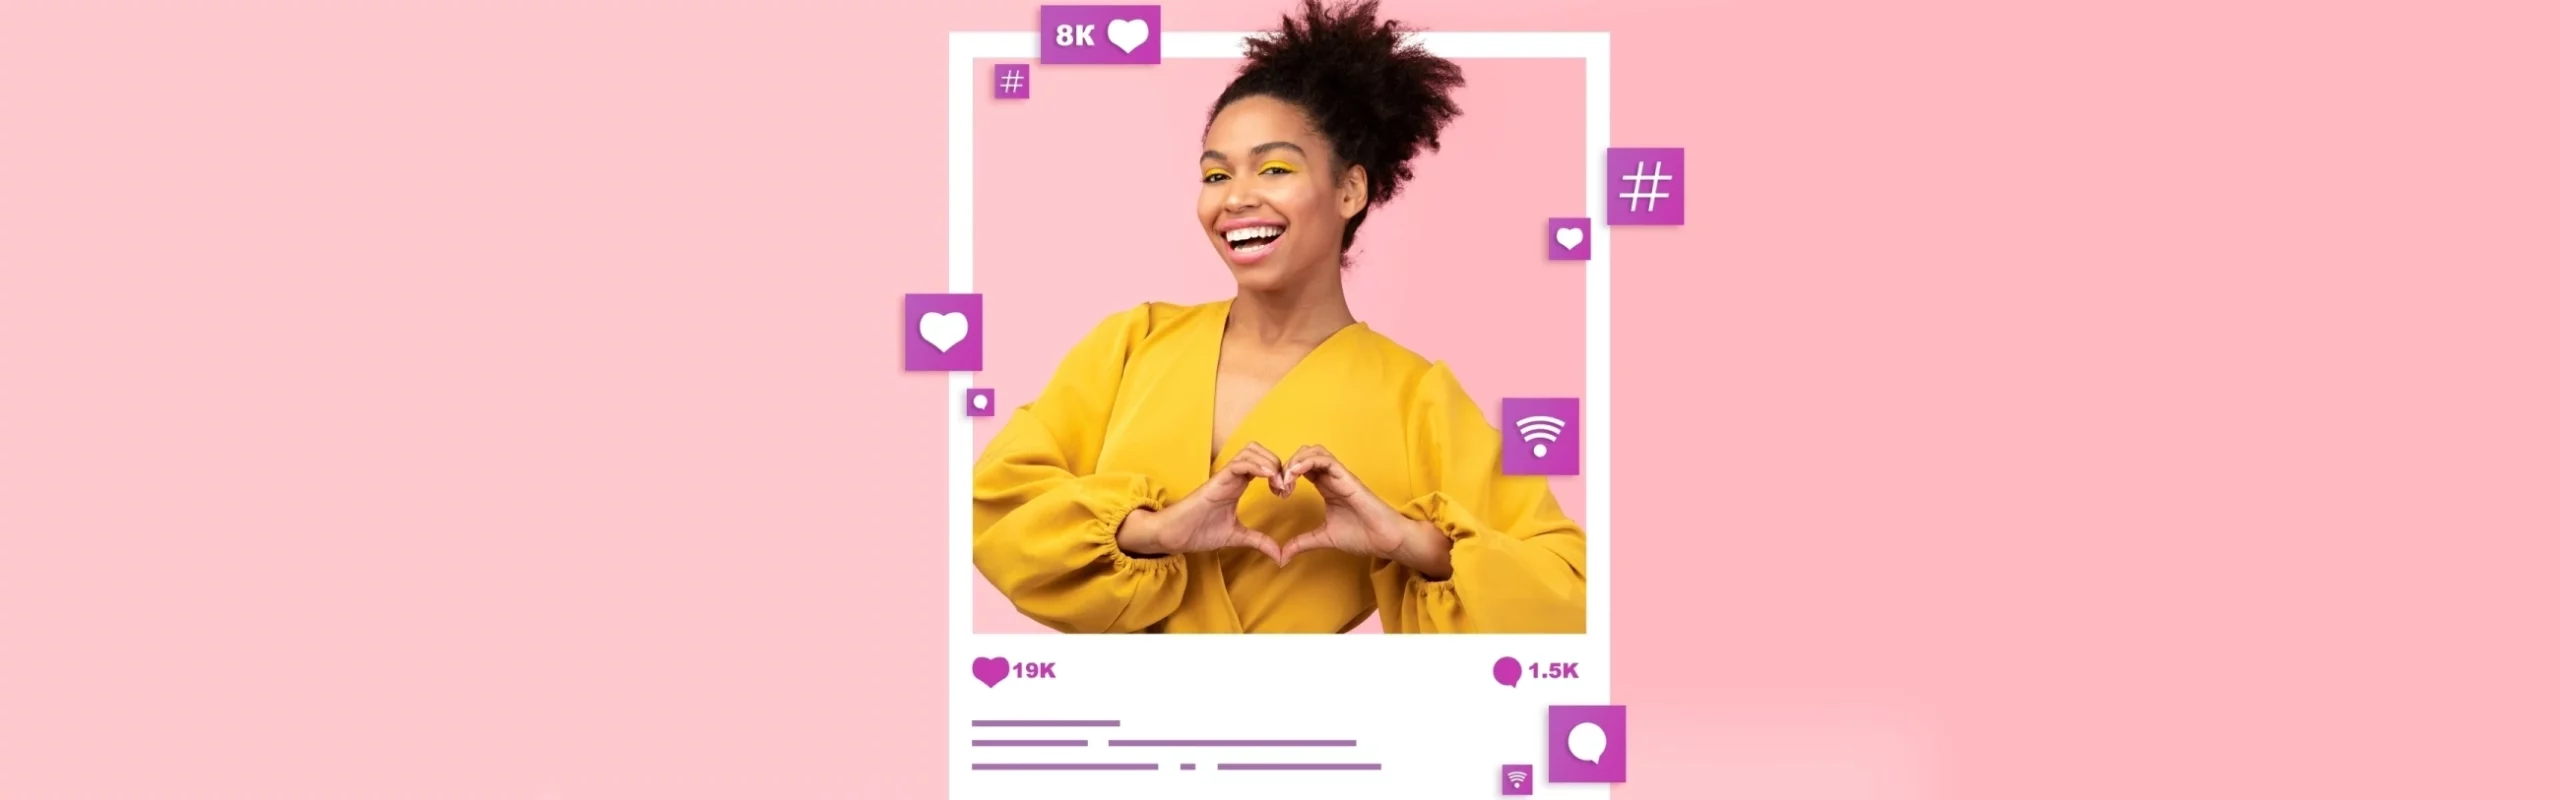 Female Influencer forming a heart with her hands, standing within a frame that looks like a posting